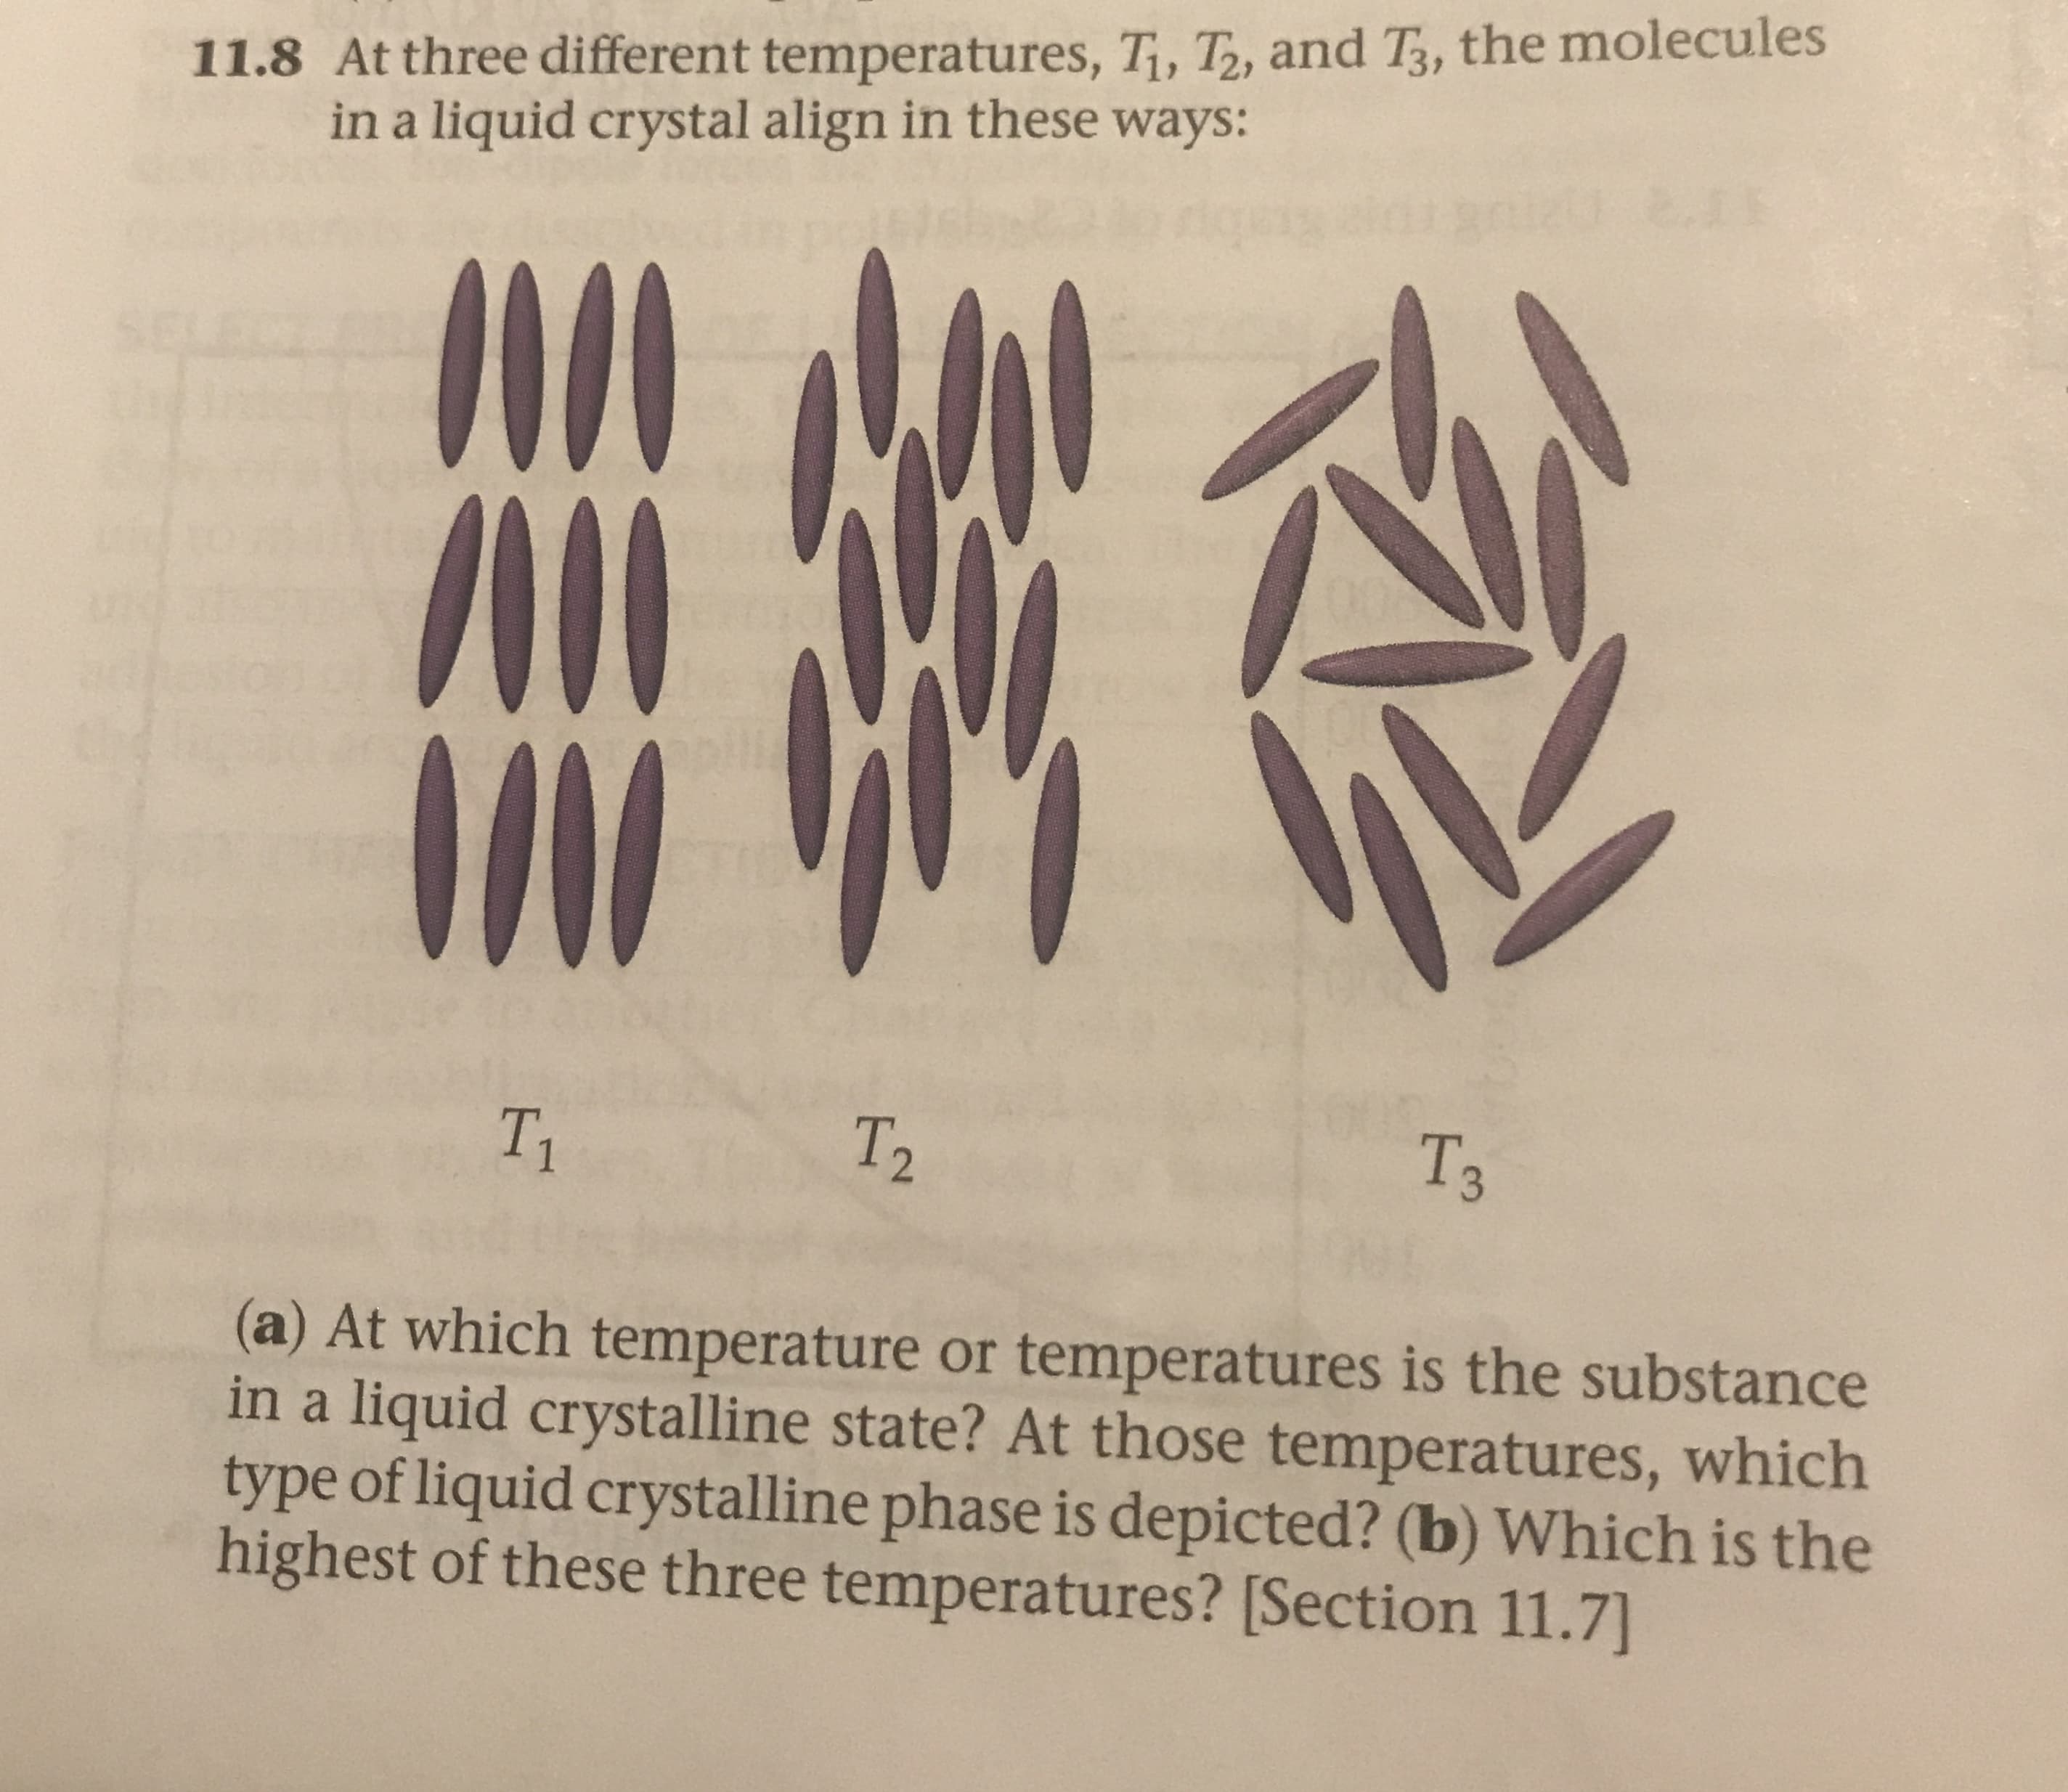 11.8 At three different temperatures, Ti, T, and T, the molecules
in a liquid crystal align in these ways:
2.1
5EL6
Тз
T2
T1
(a) At which temperature or temperatures is the substance
in a liquid crystalline state? At those temperatures, which
type of liquid crystalline phase is depicted? (b) Which is the
highest of these three temperatures? [Section 11.7)
